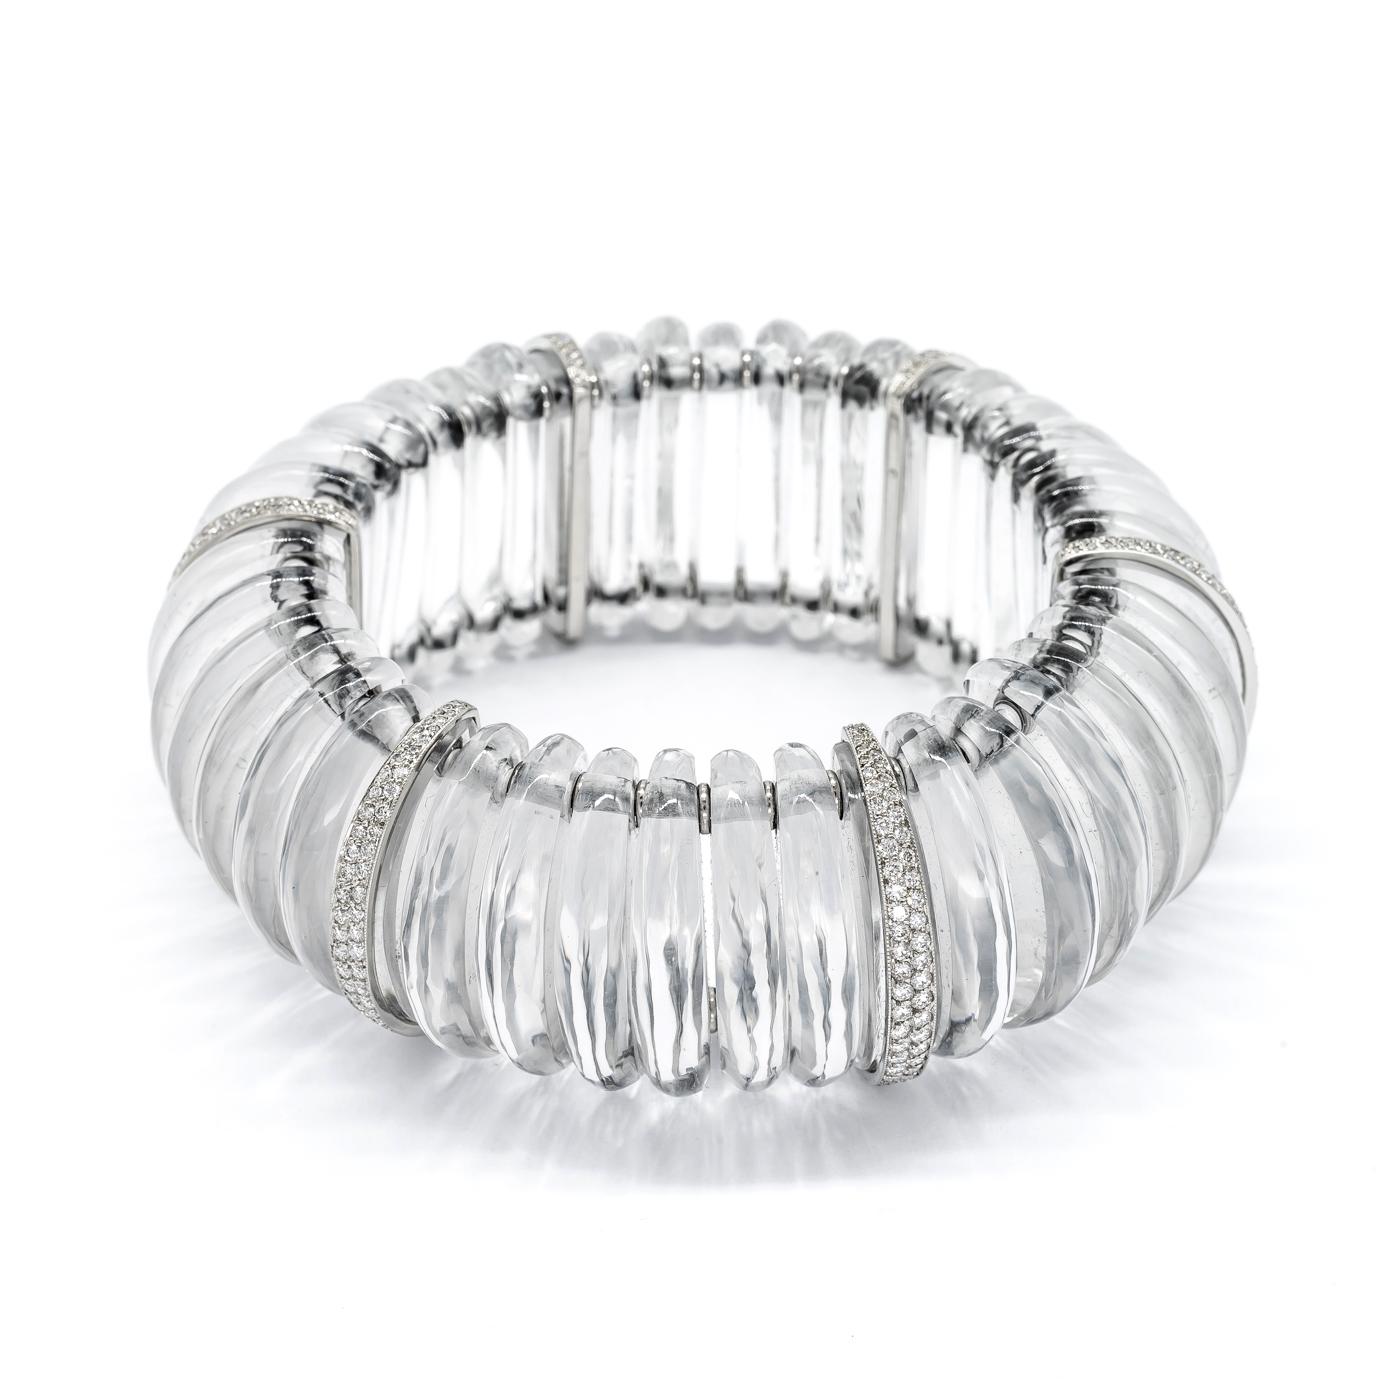 A rock crystal and diamond bracelet, on springs, with spacers, set with two rows of diamonds in platinum settings. 